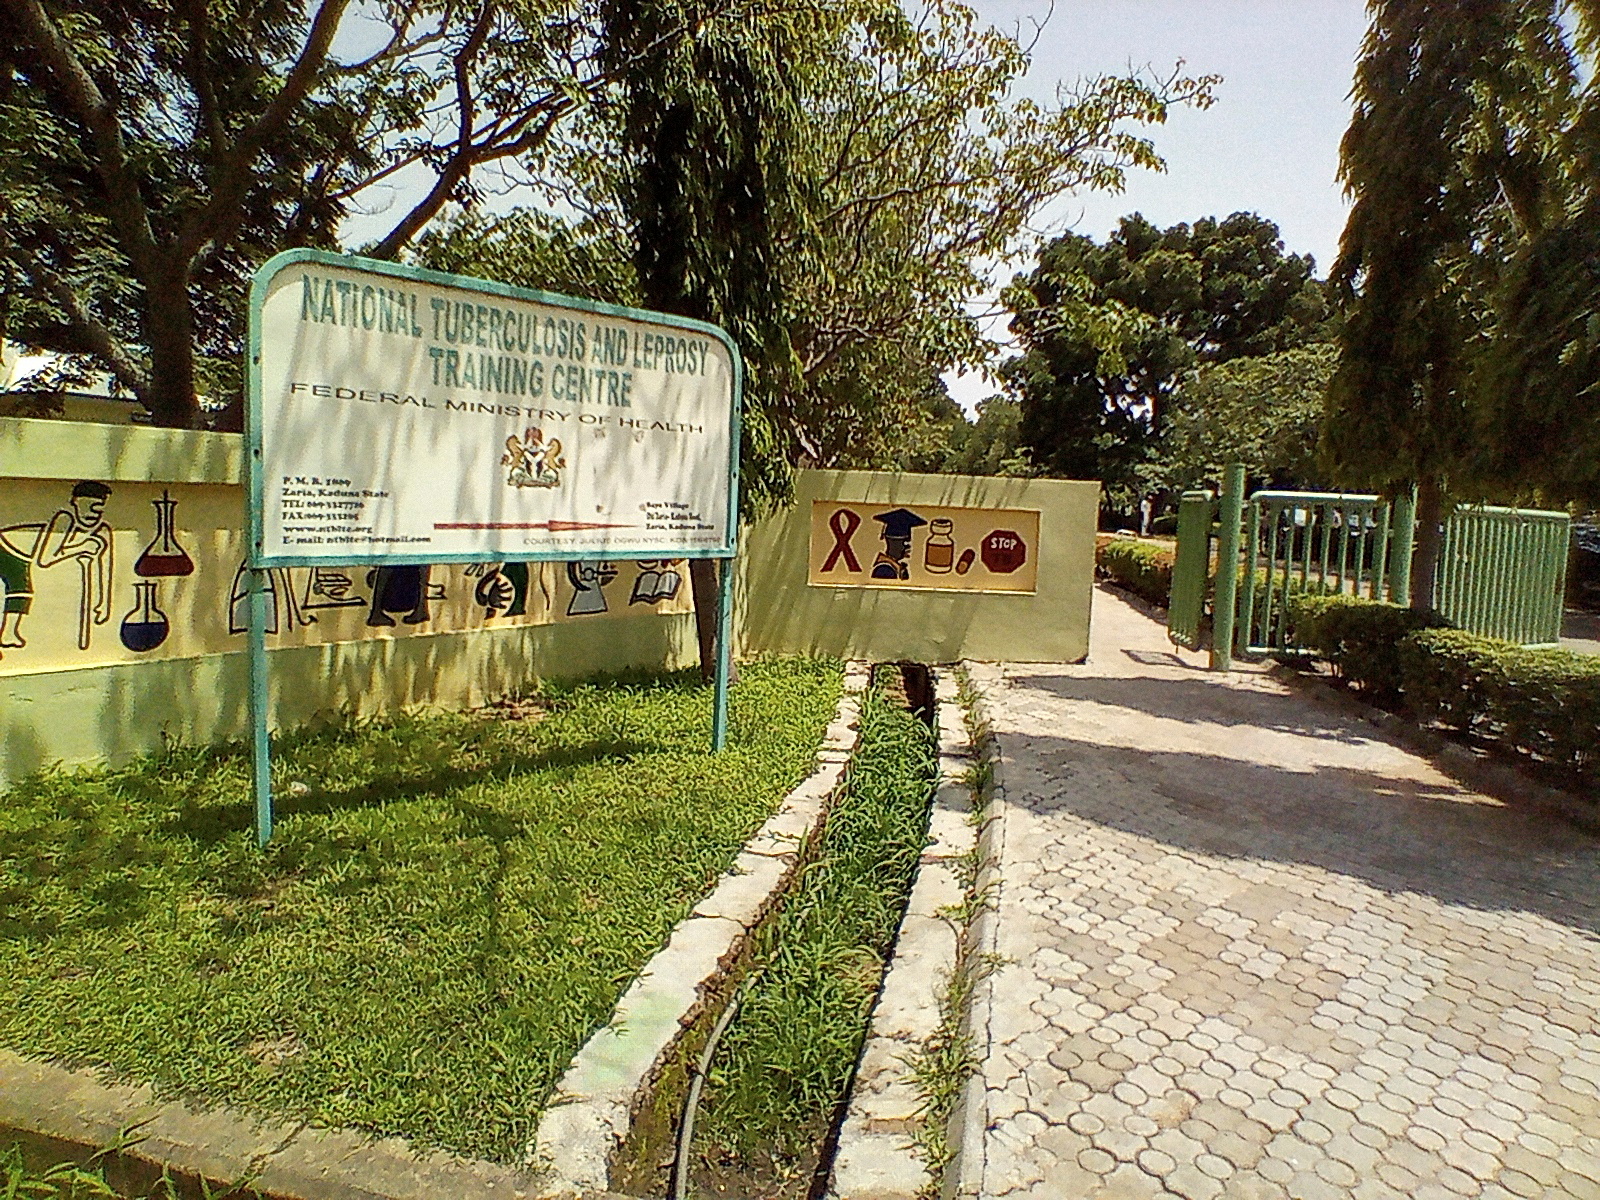 A path leads into the National Tuberculosis and Leprosy training center in Kaduna